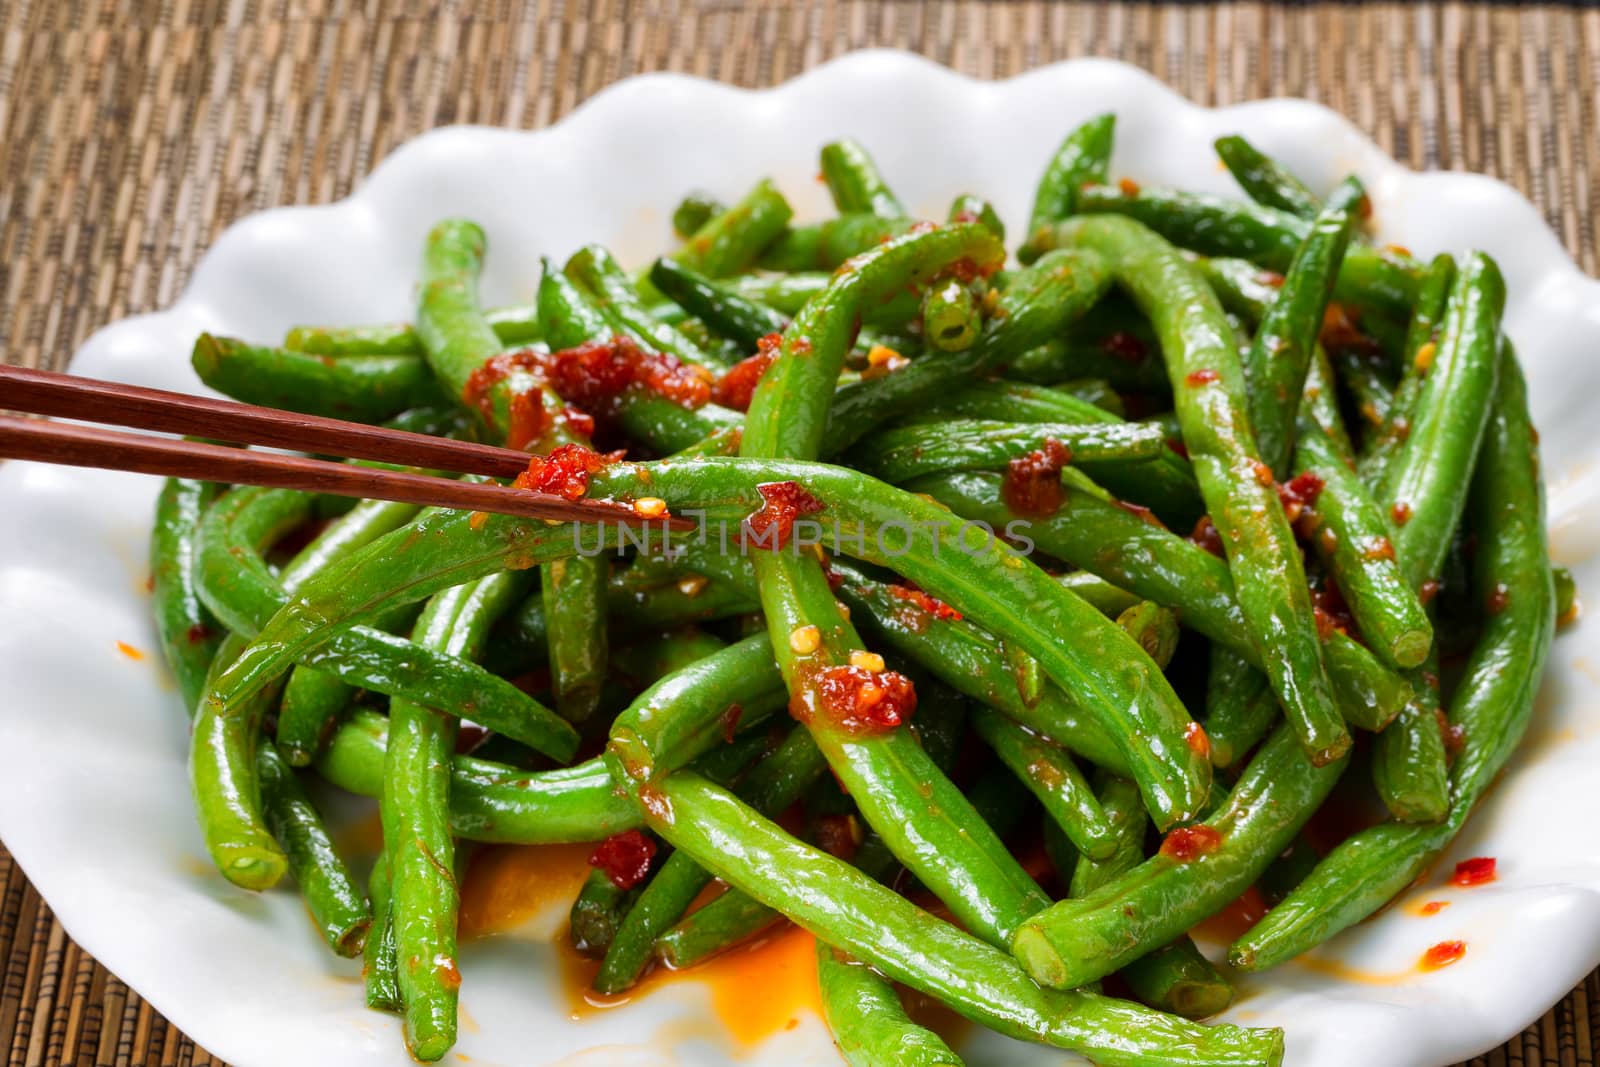 Close up view of spicy green beans with chopsticks in use. Selective focus on single bean being held by chopsticks. 